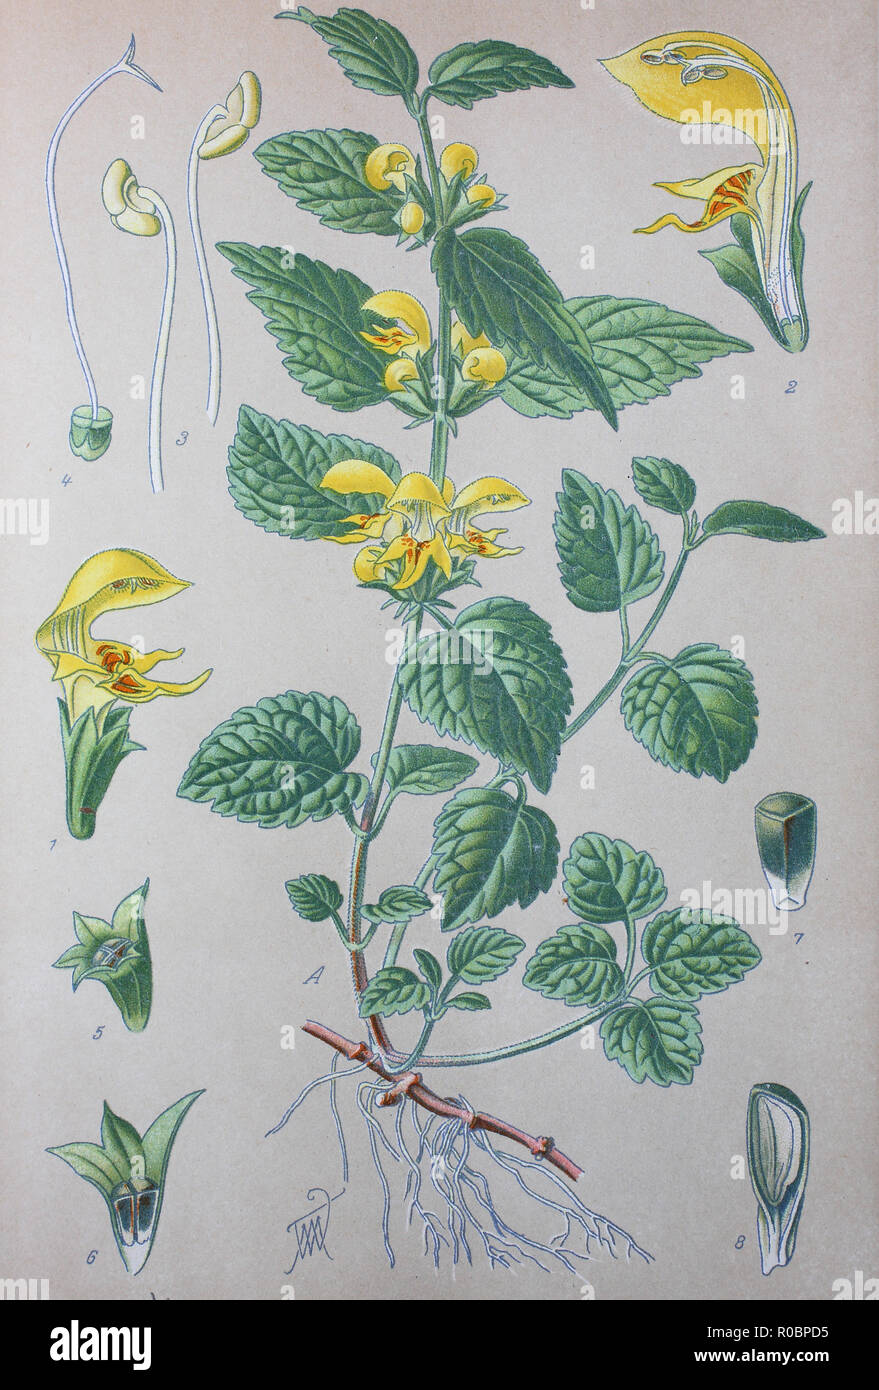 Digital improved high quality reproduction: Lamium galeobdolon, commonly known as yellow archangel, artillery plant, or aluminium plant, is a widespread wildflower in Europe, and has been introduced elsewhere as a garden plant. It displays the zygomorphic flower morphology, opposite leaves, and square stems typical of the mint family, Lamiaceae Stock Photo